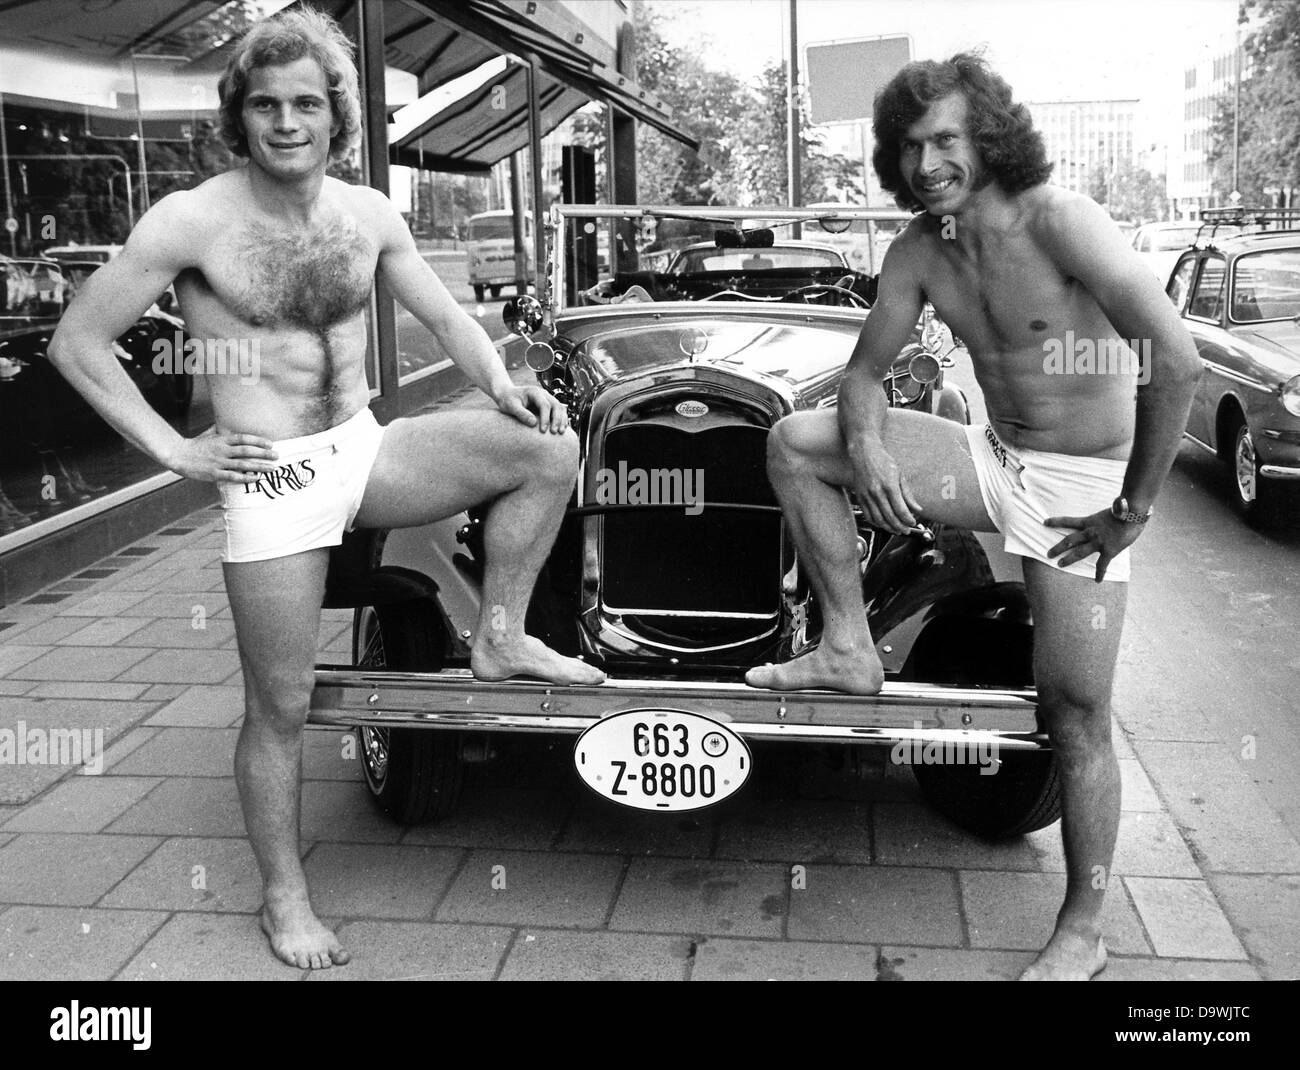 Picture of soccer players of FC Bayern Munich Uli Hoeneß (l) and Paul Breitner (r) posing in bathing trunks on the 5th of June in 1973. Stock Photo